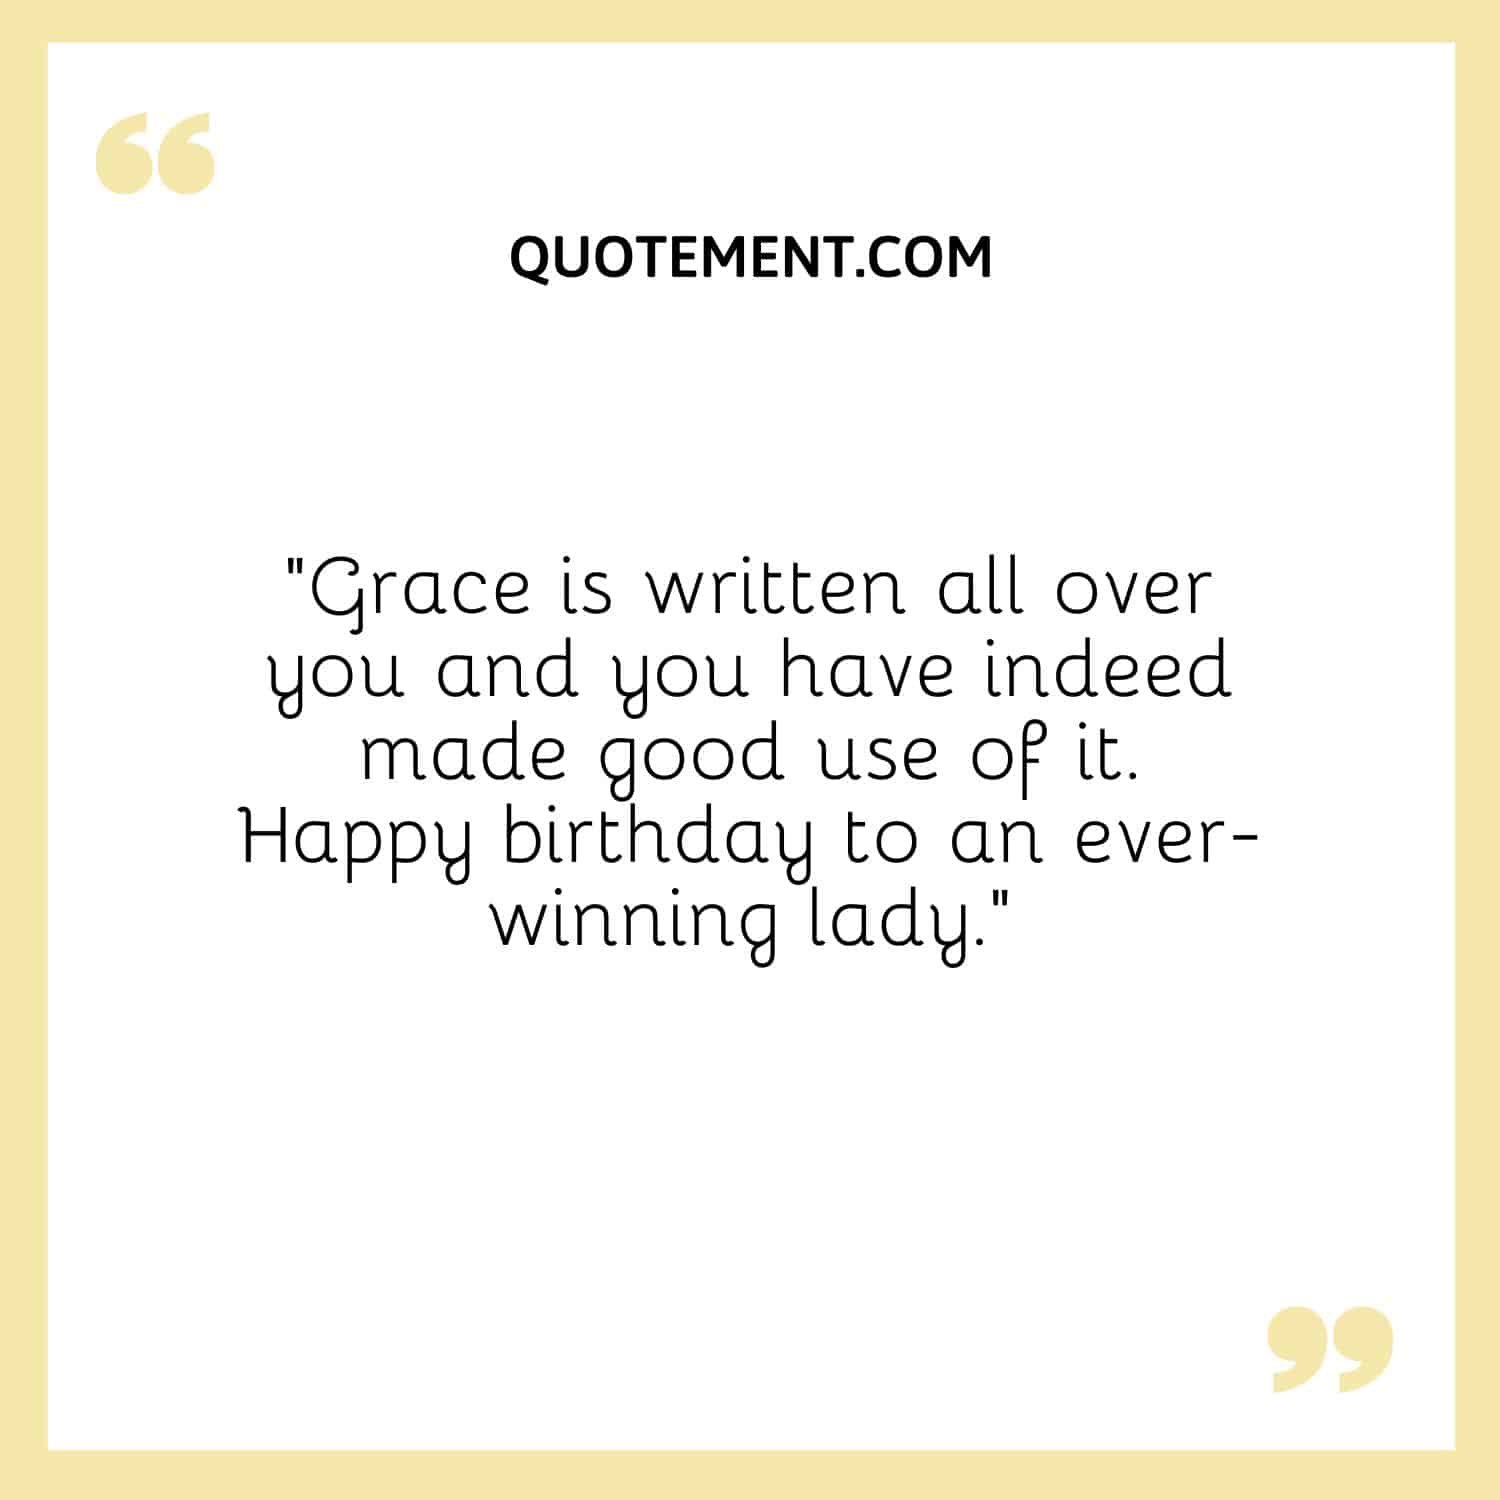 Grace is written all over you and you have indeed made good use of it